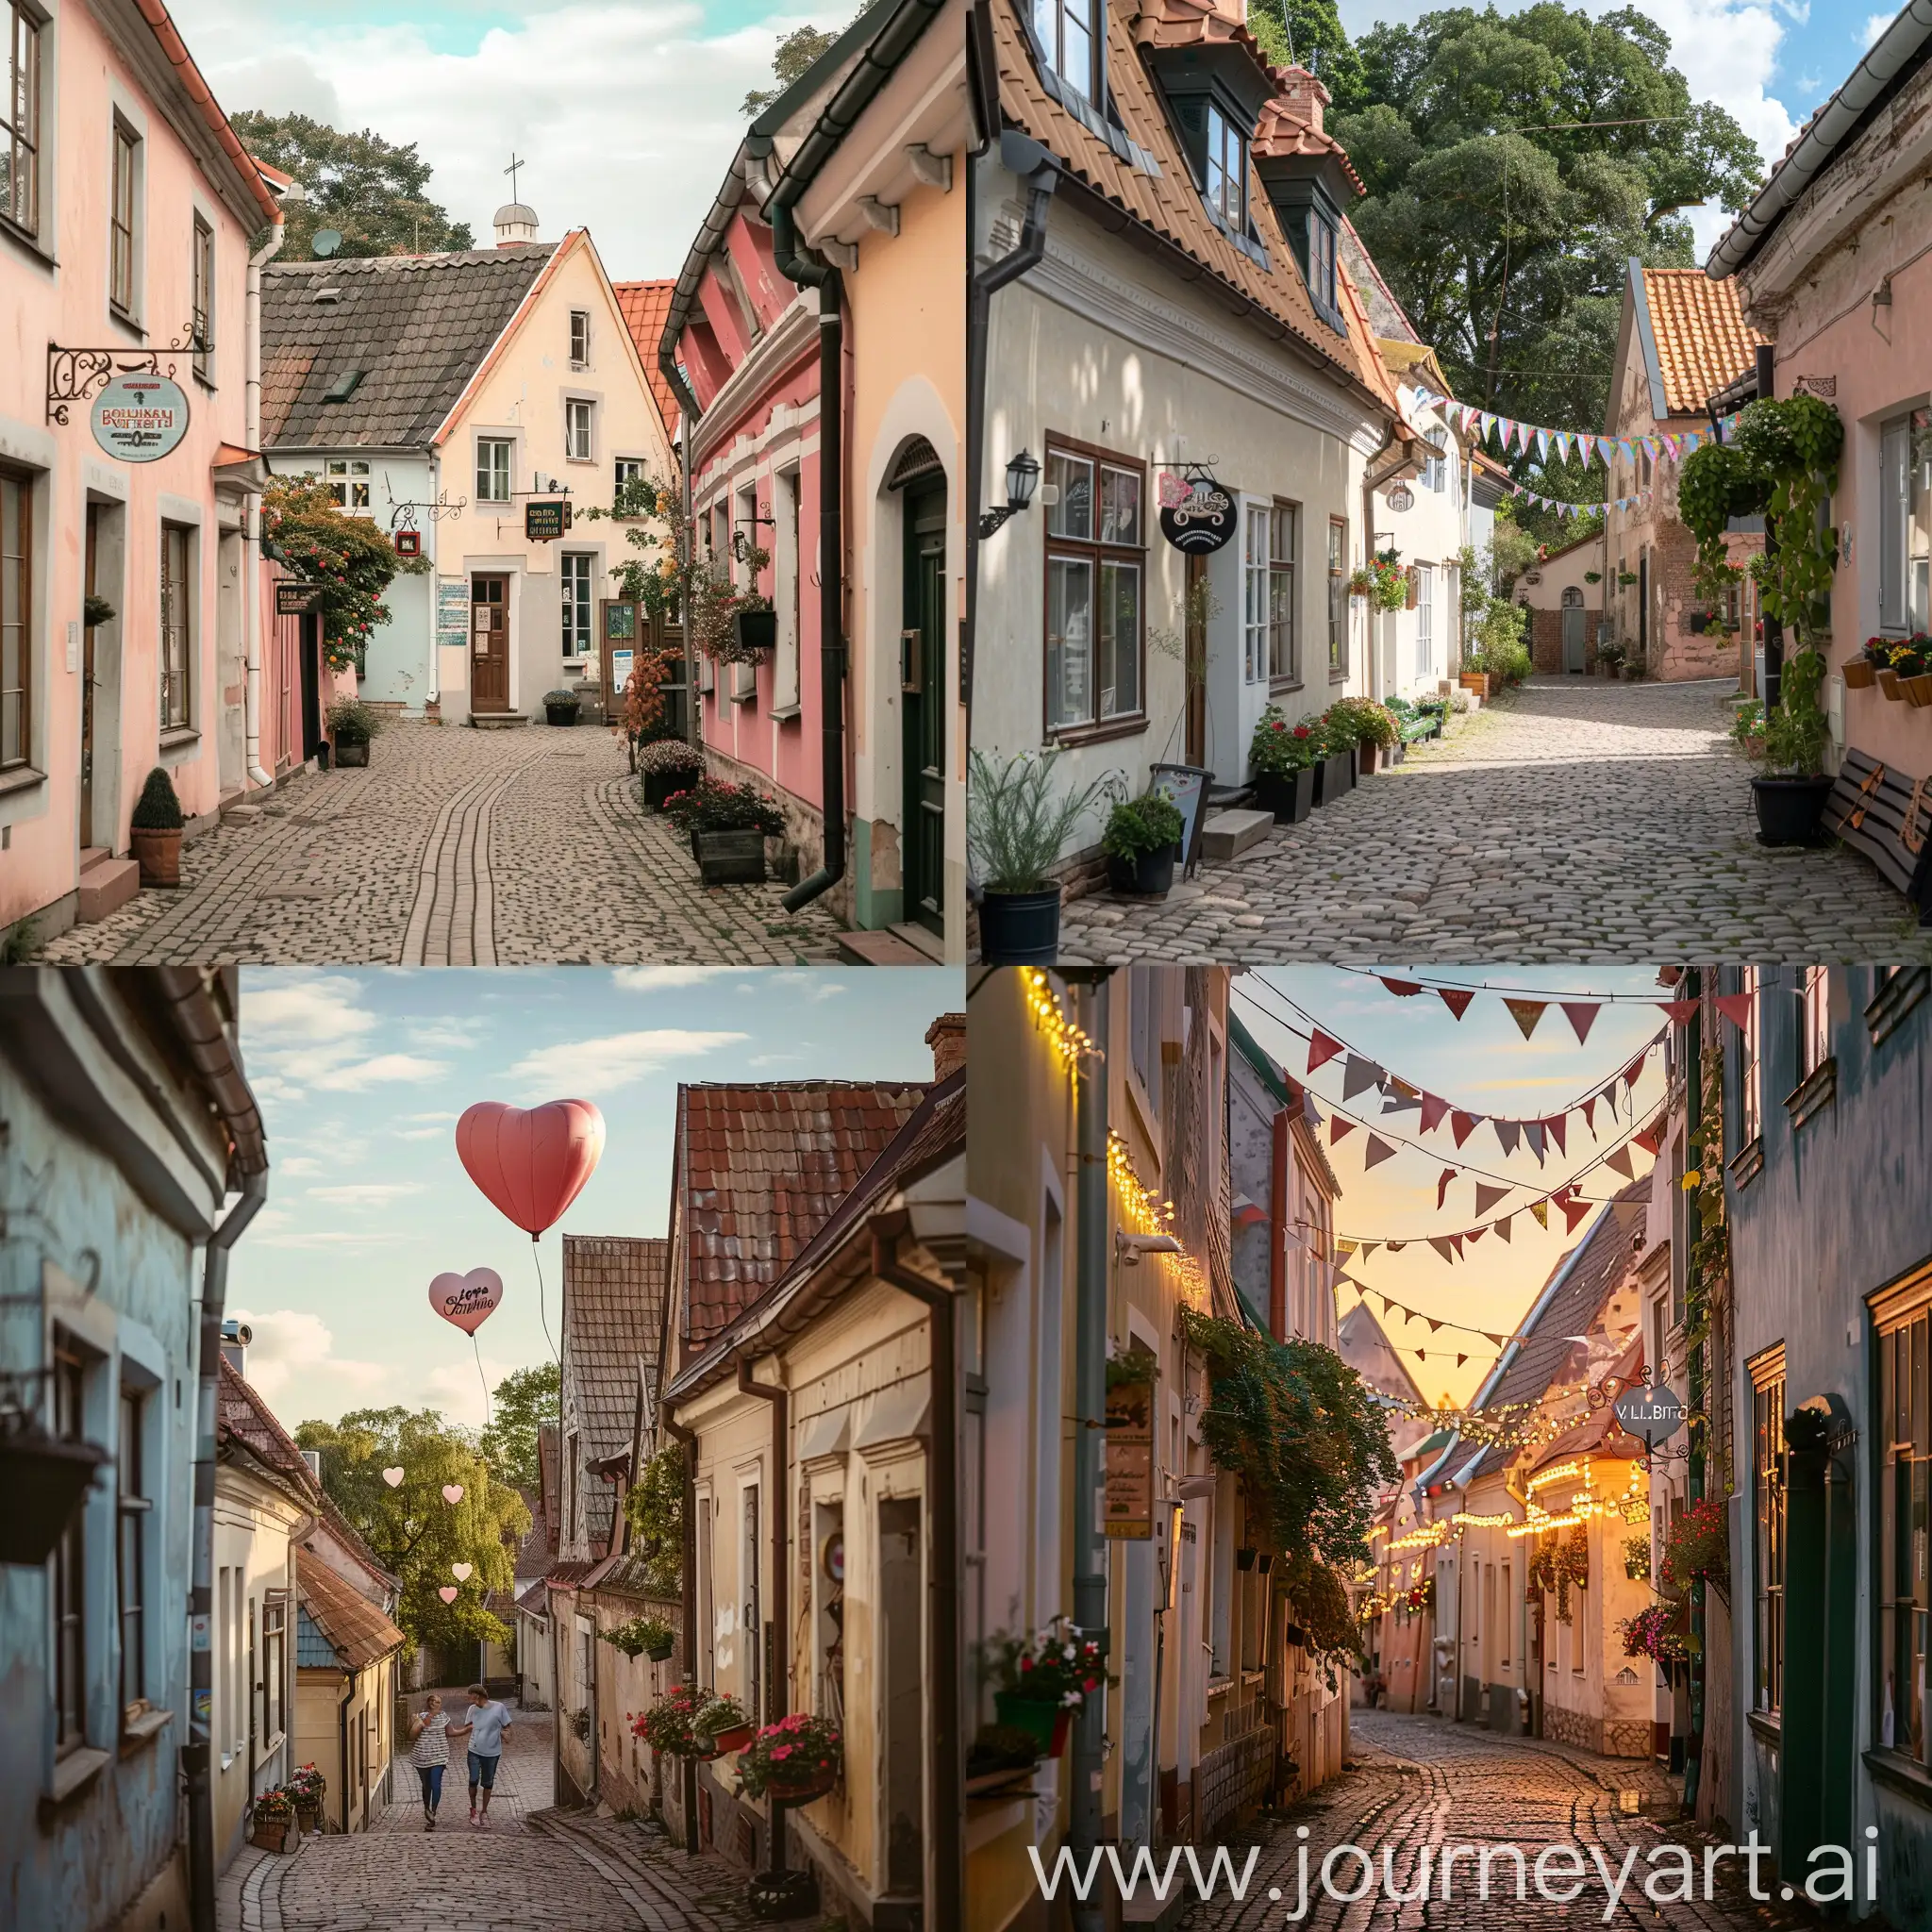 Create a heartwarming birthday image set against the backdrop of Valka, Latvia. Picture a joyful celebration unfolding in the heart of this charming town